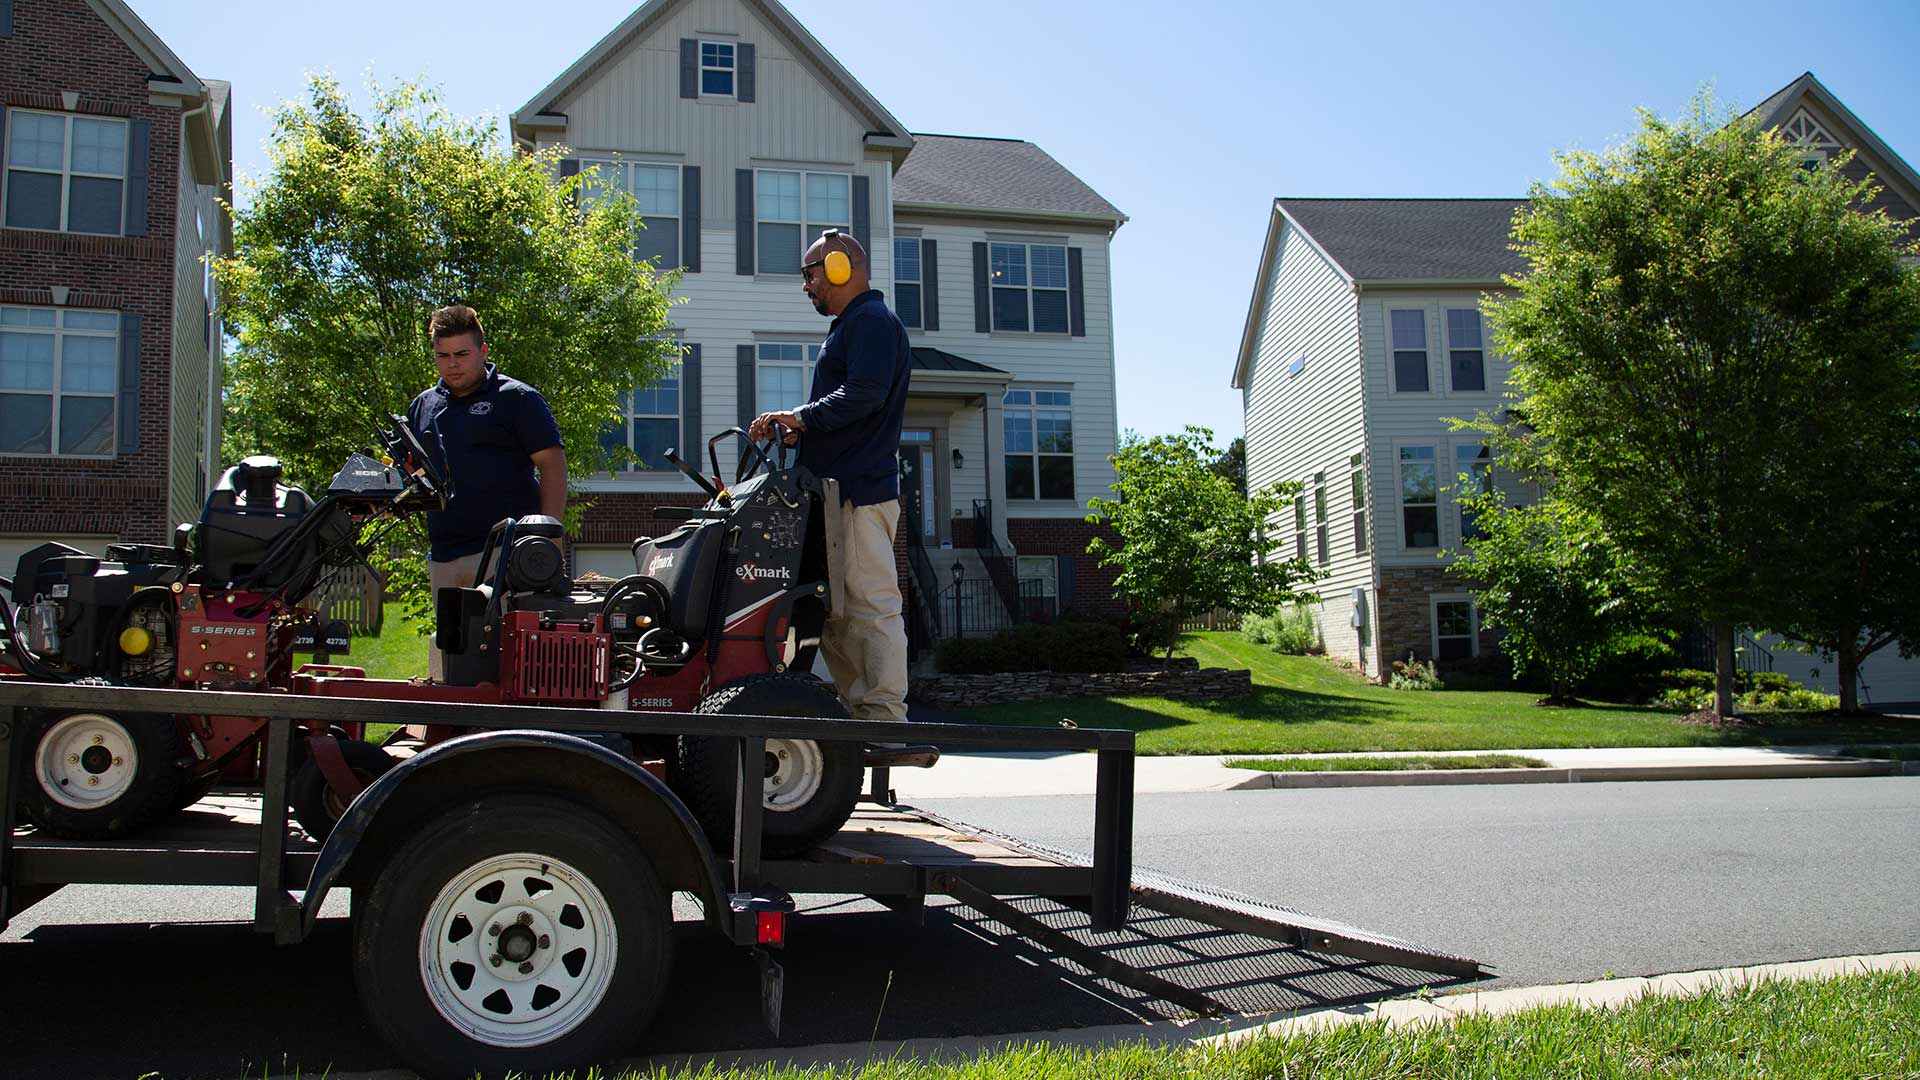 Two lawn professionals prepping to take care of a customer's lawn near Arlington, VA.